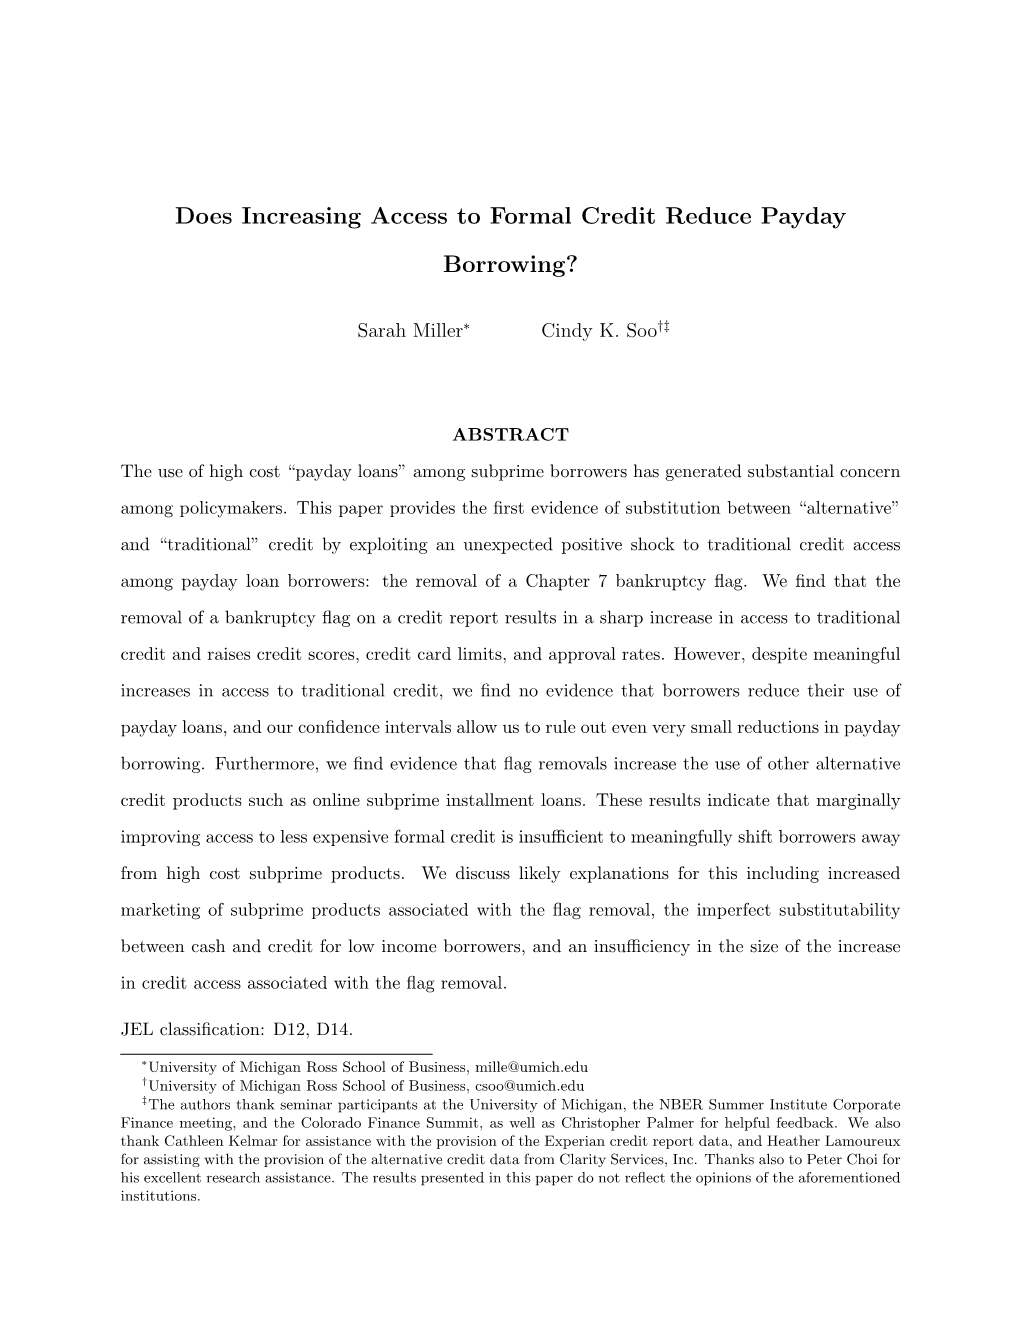 Does Increasing Access to Formal Credit Reduce Payday Borrowing?